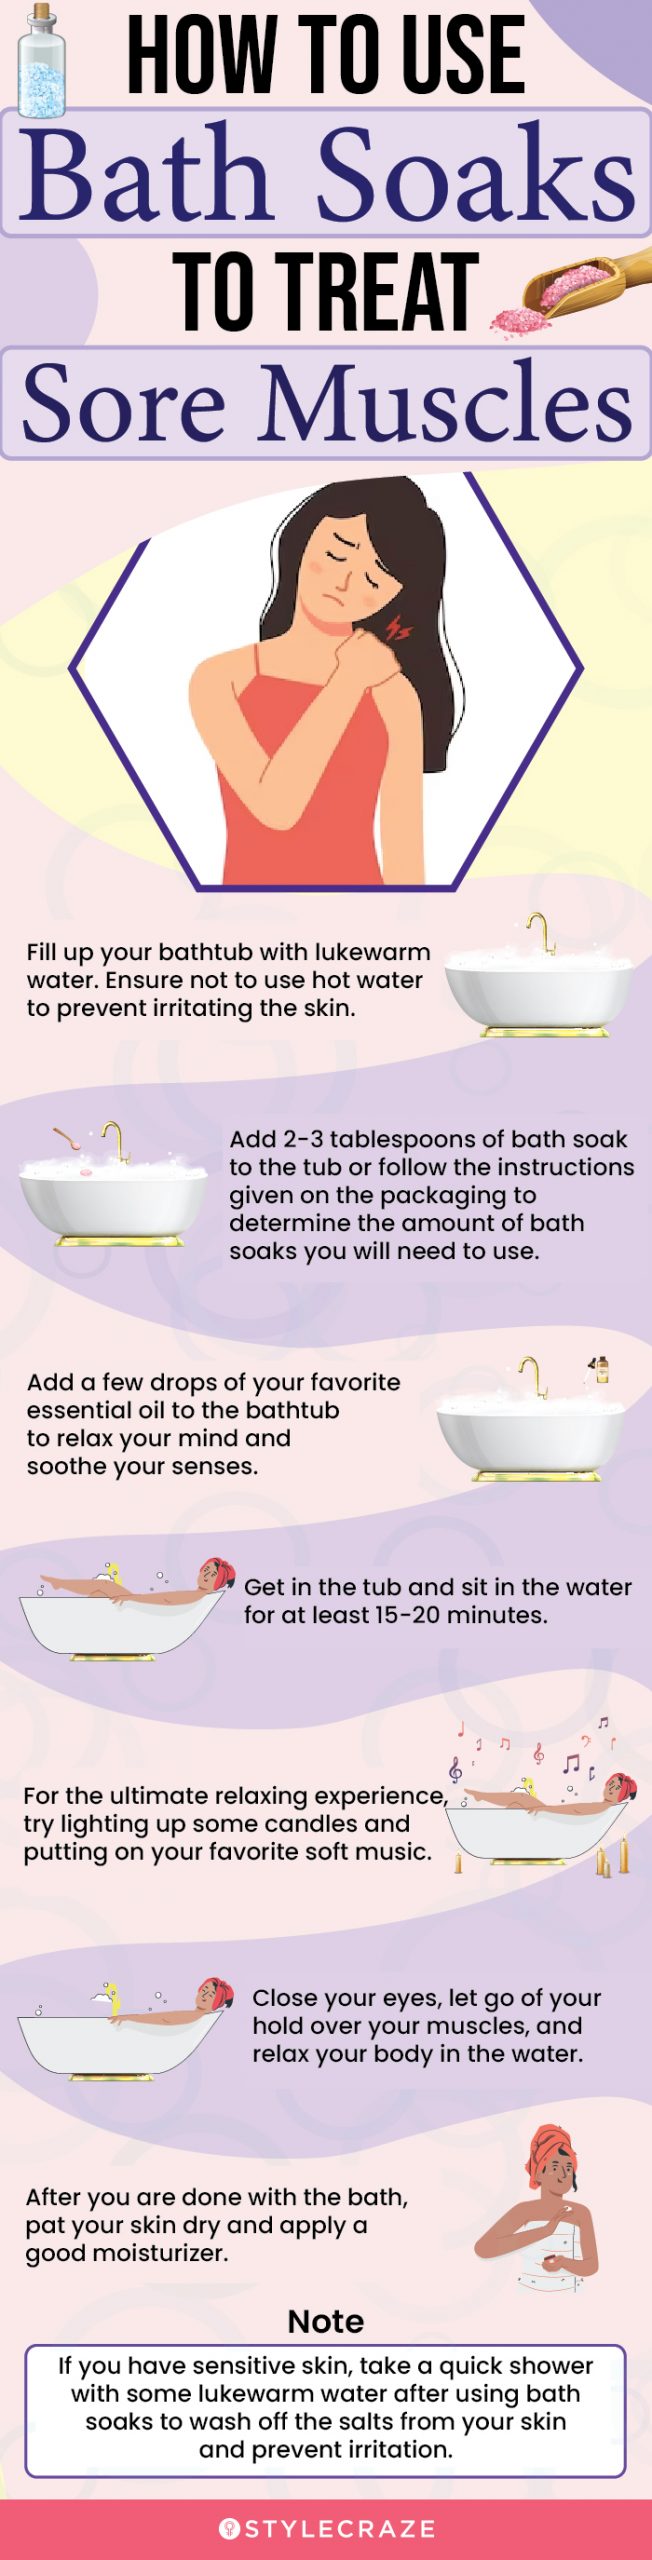 How To Use Bath Soaks To Treat Sore Muscles (infographic)